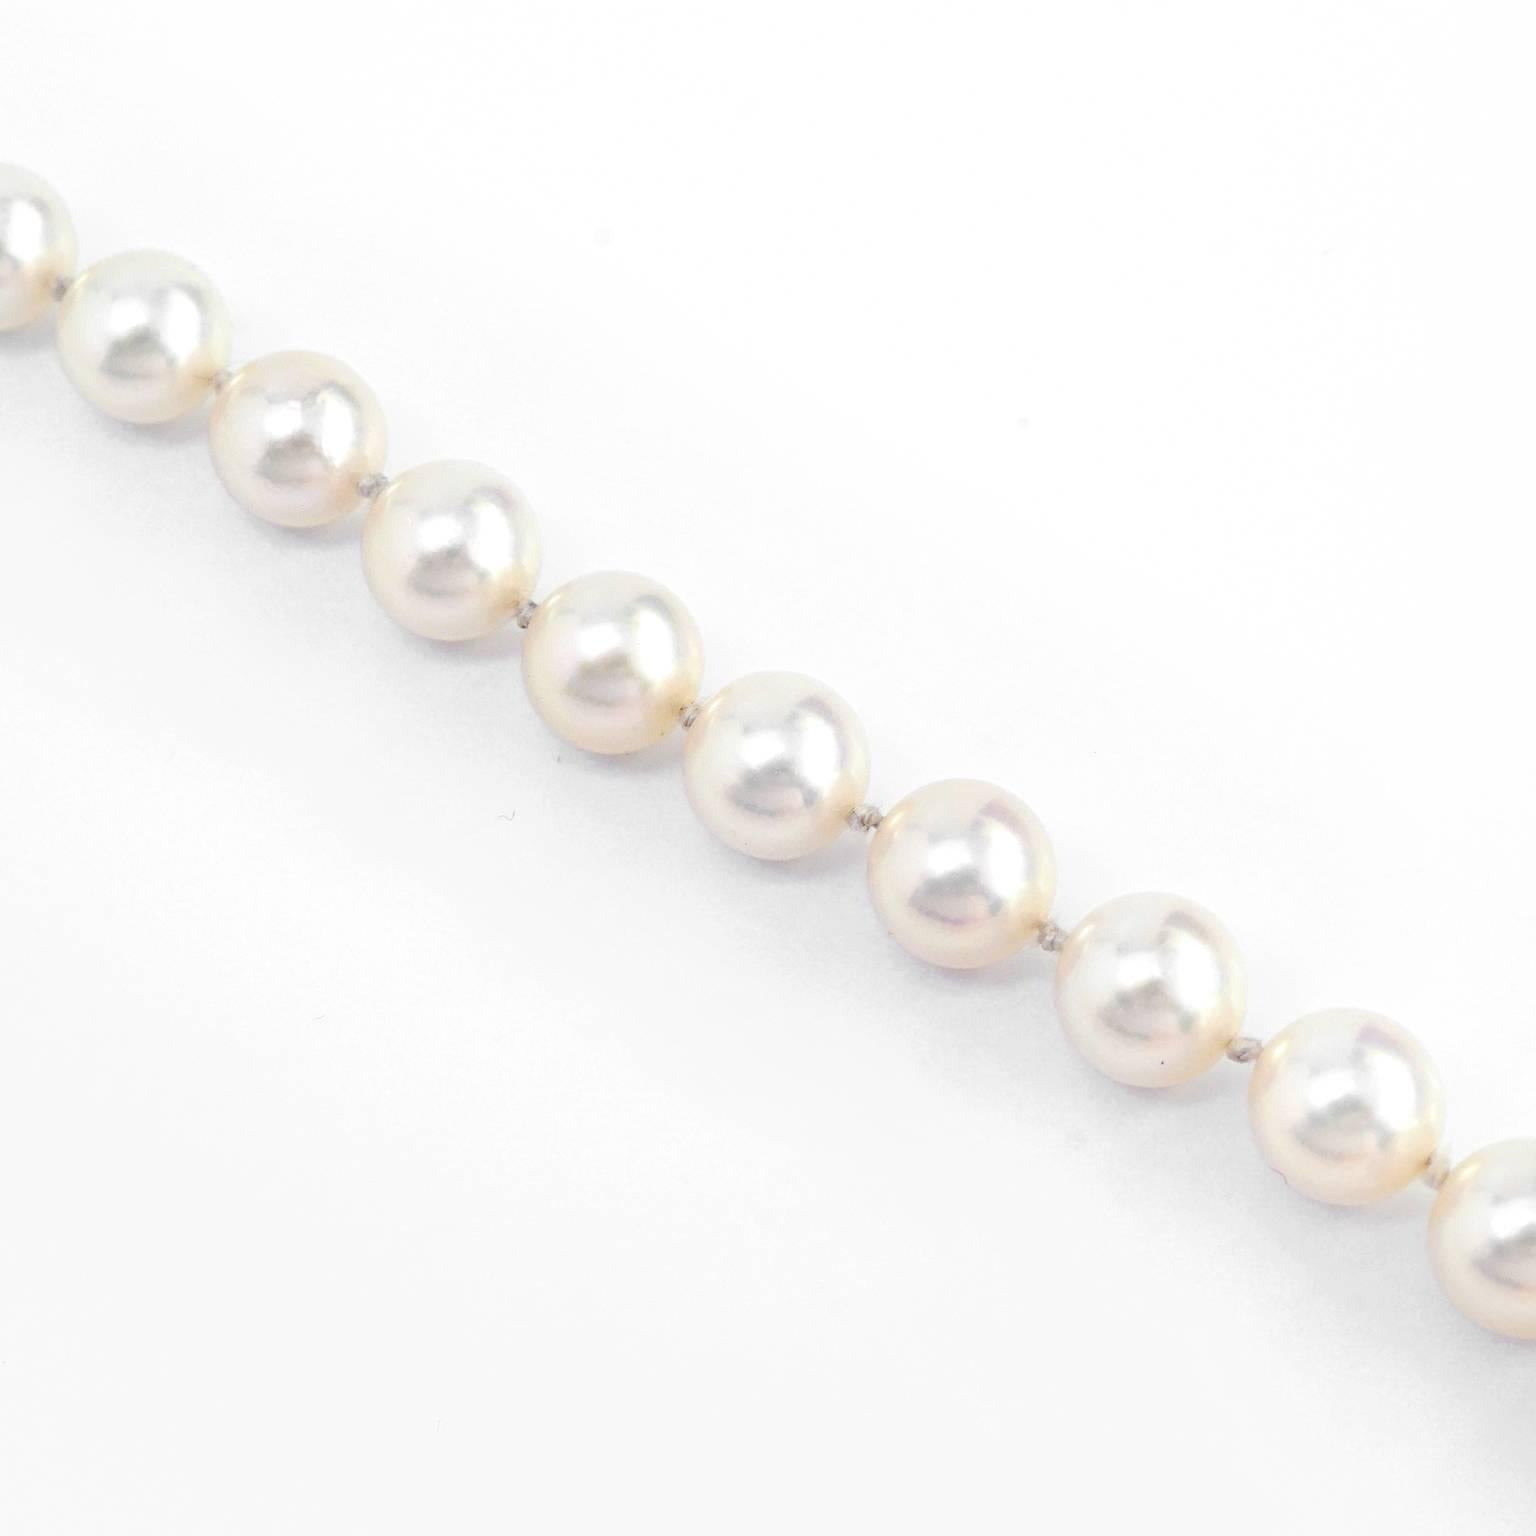 Women's or Men's Mikimoto 17 1/2 Inch Pearl Necklace